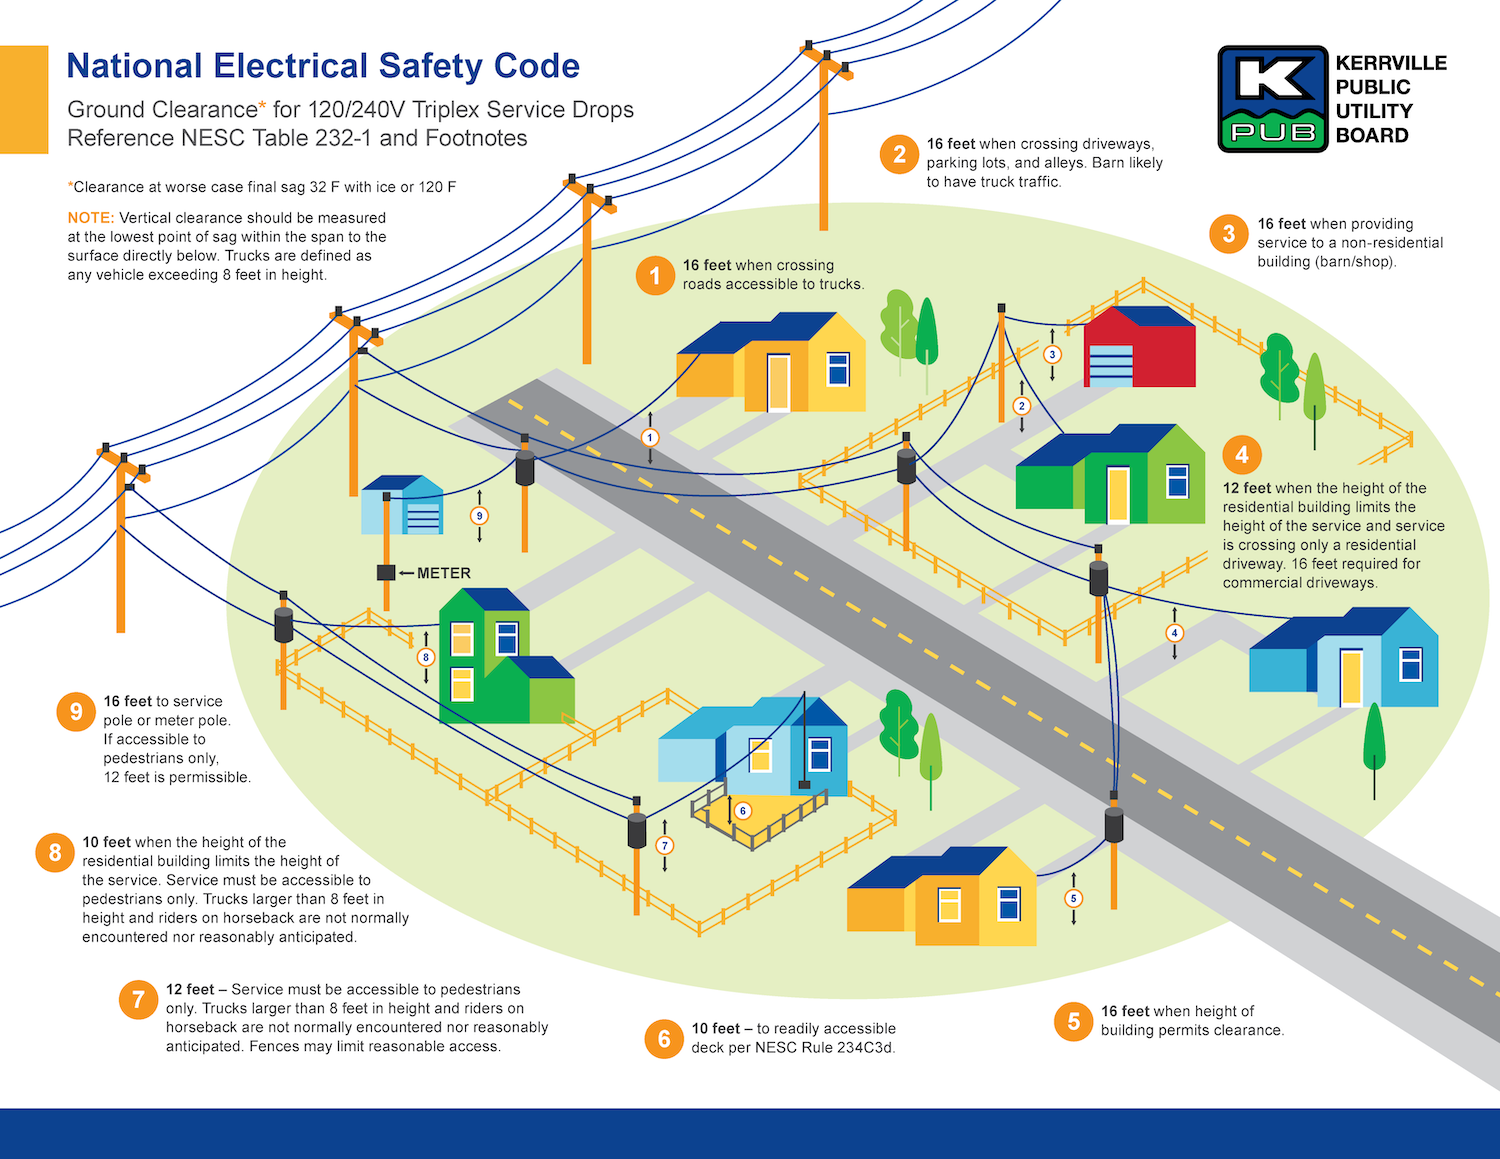 KPUB National Electric Safety Code Graphic